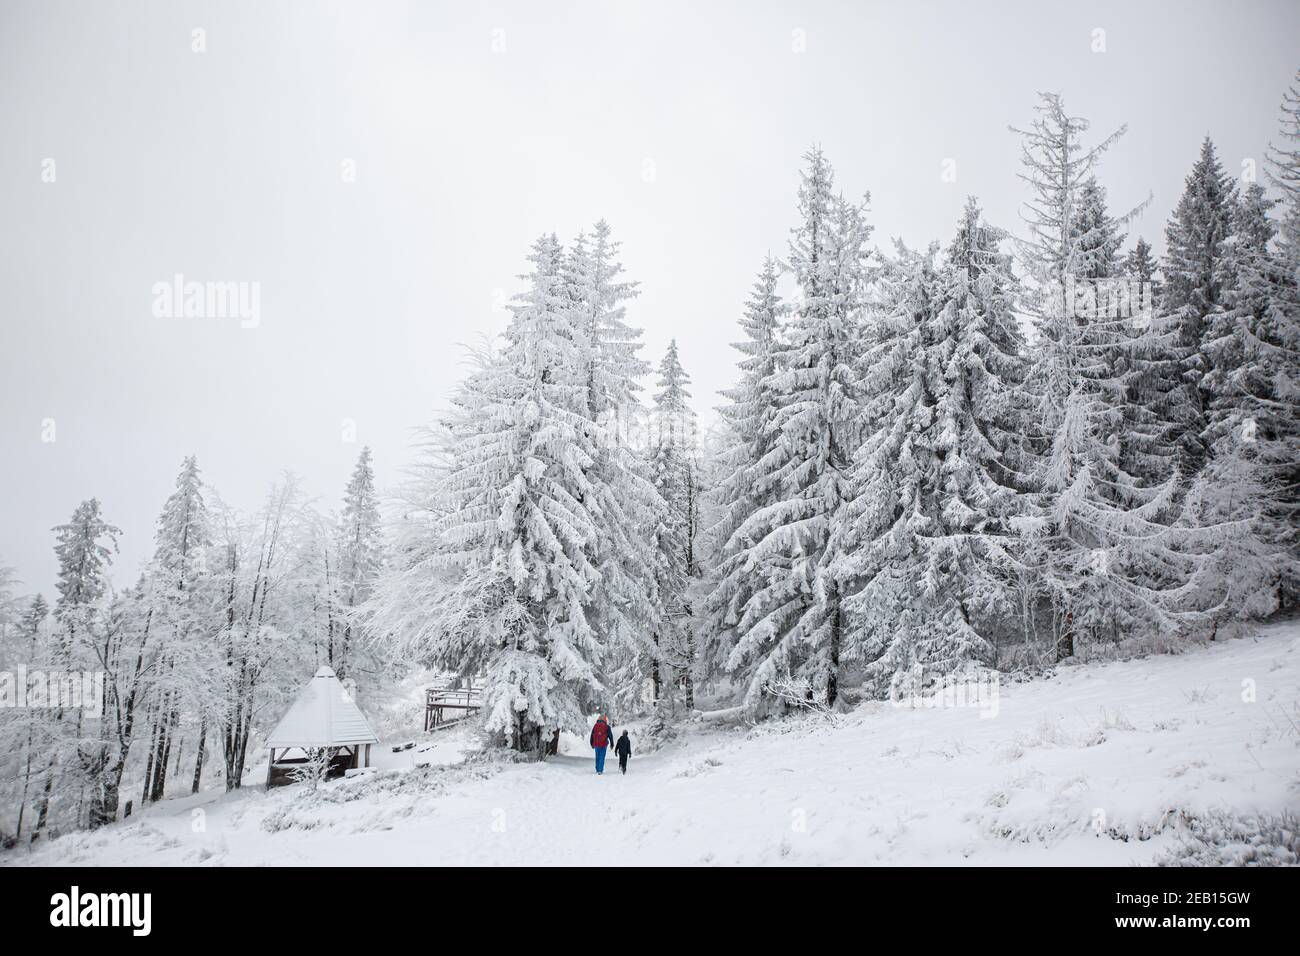 Mountain forest in winter time Stock Photo